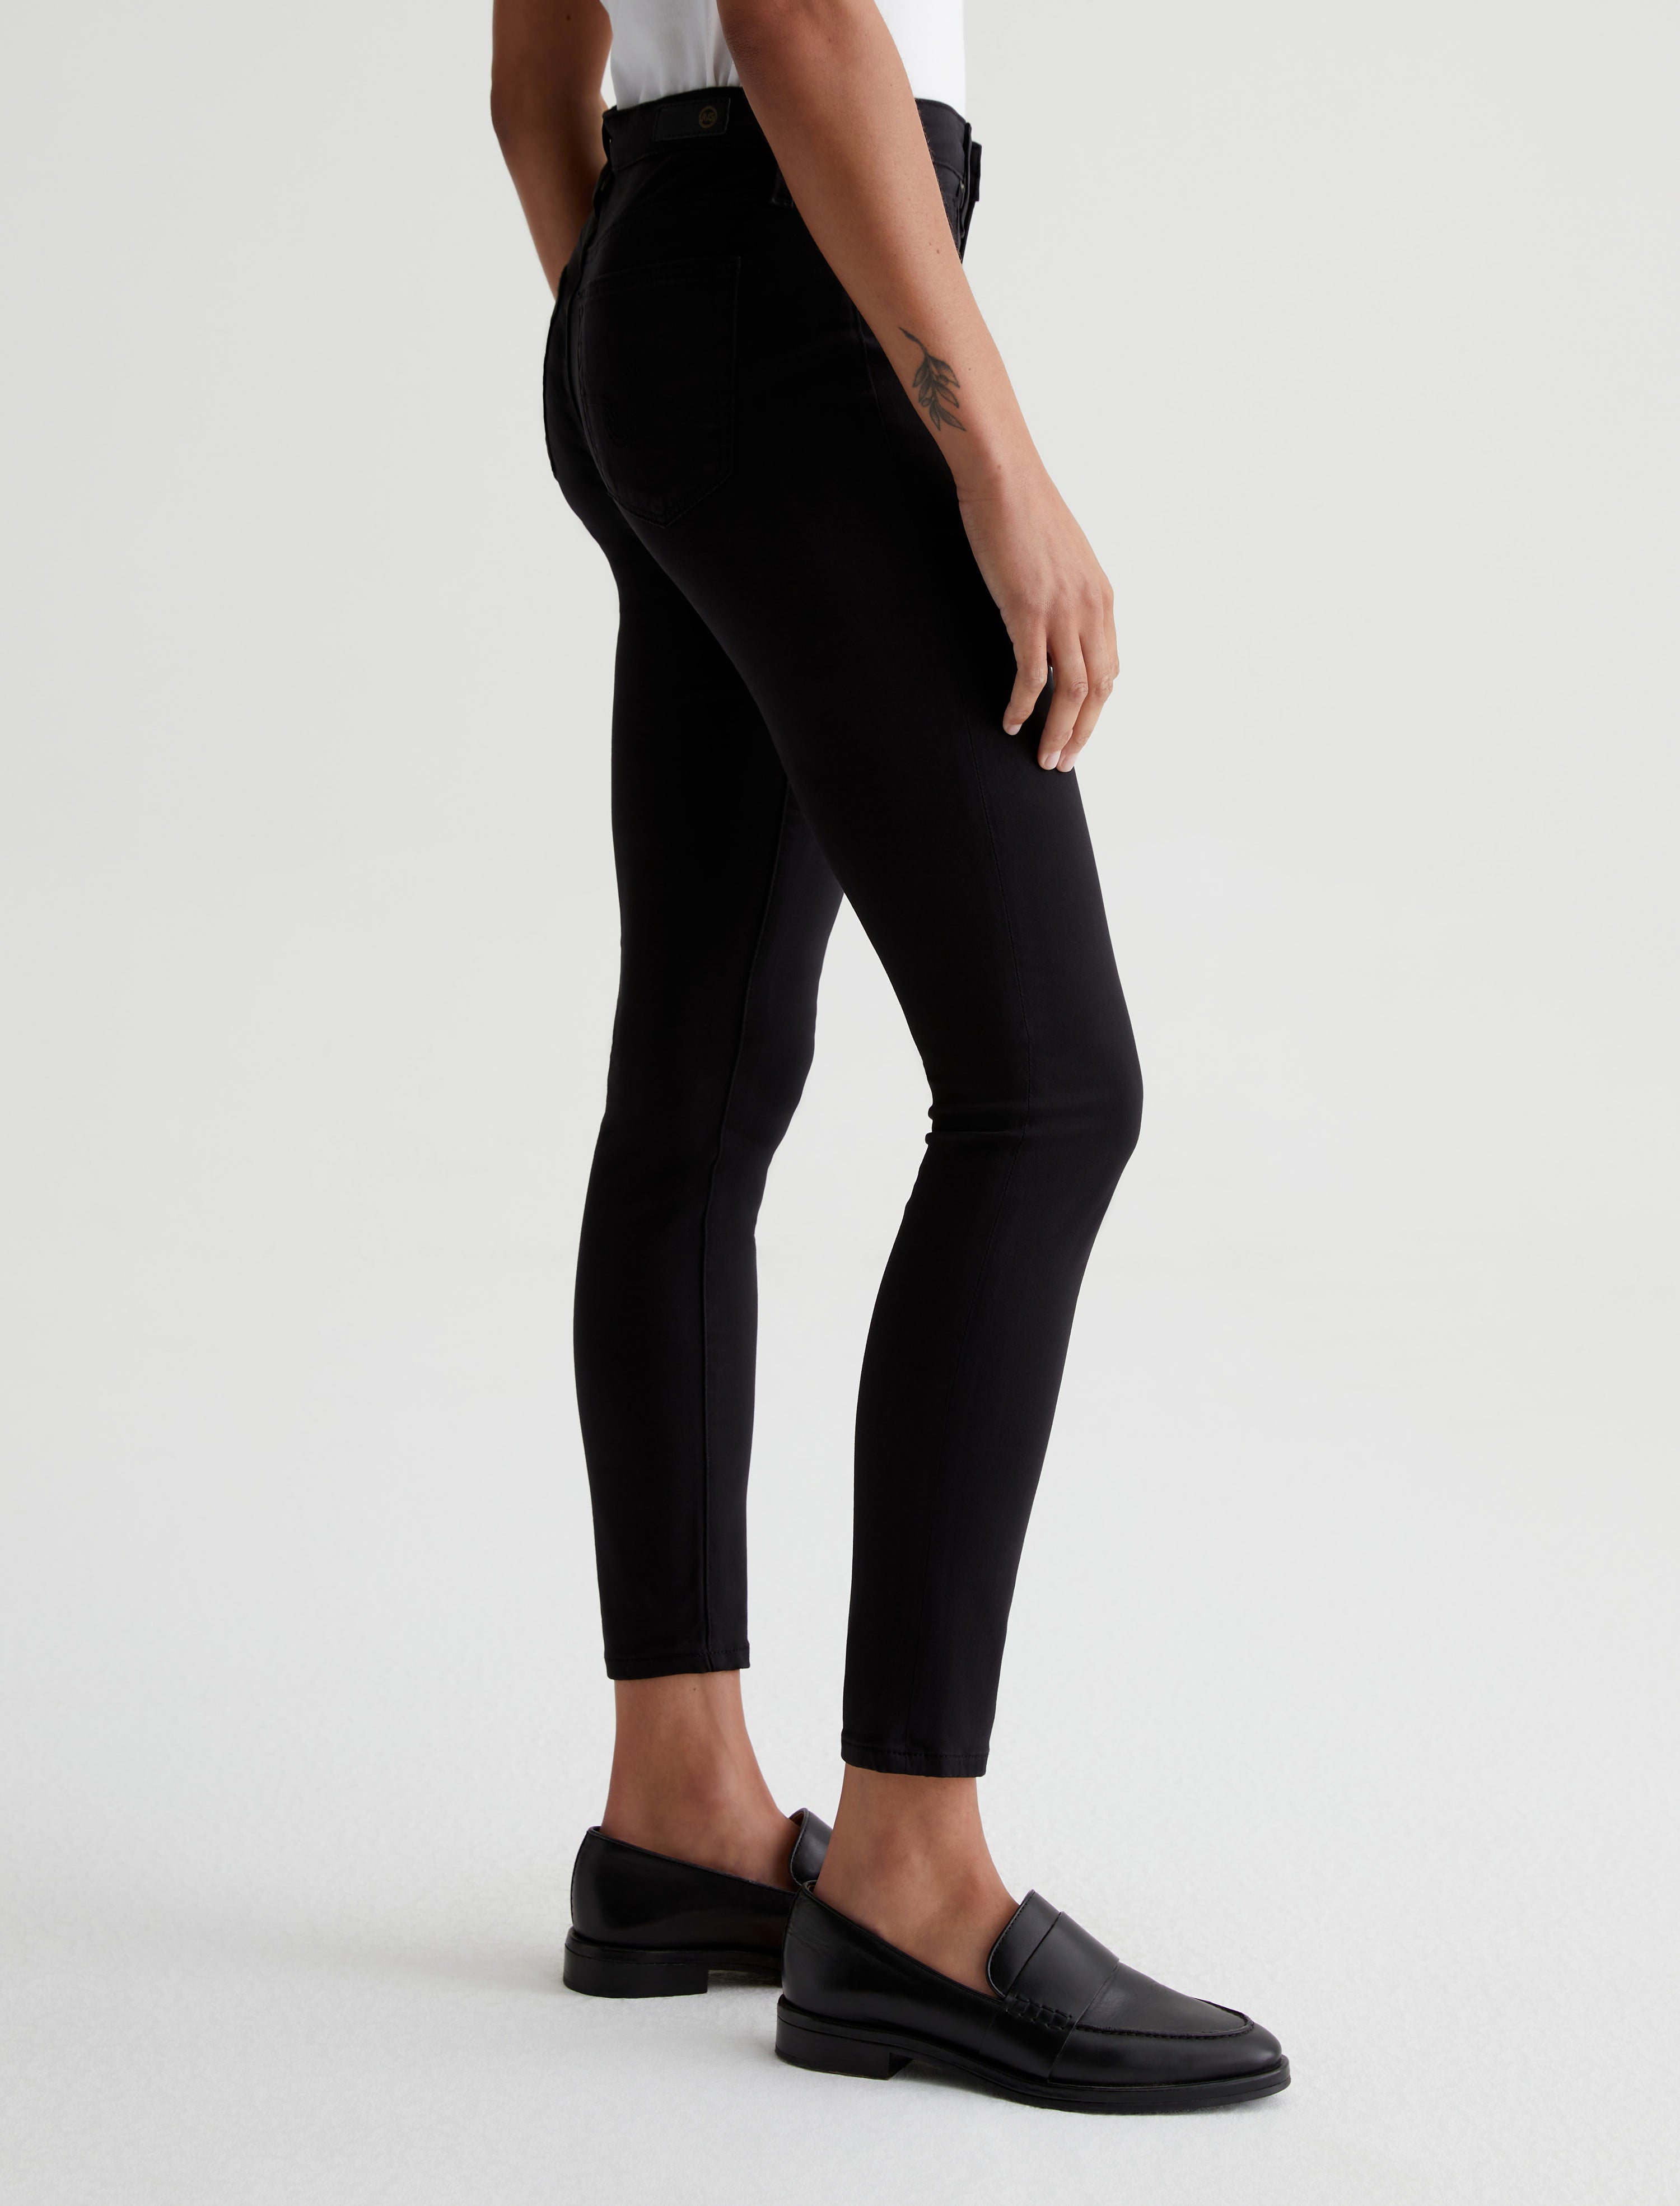 What To Wear With Black Leggings; Outfit Ideas